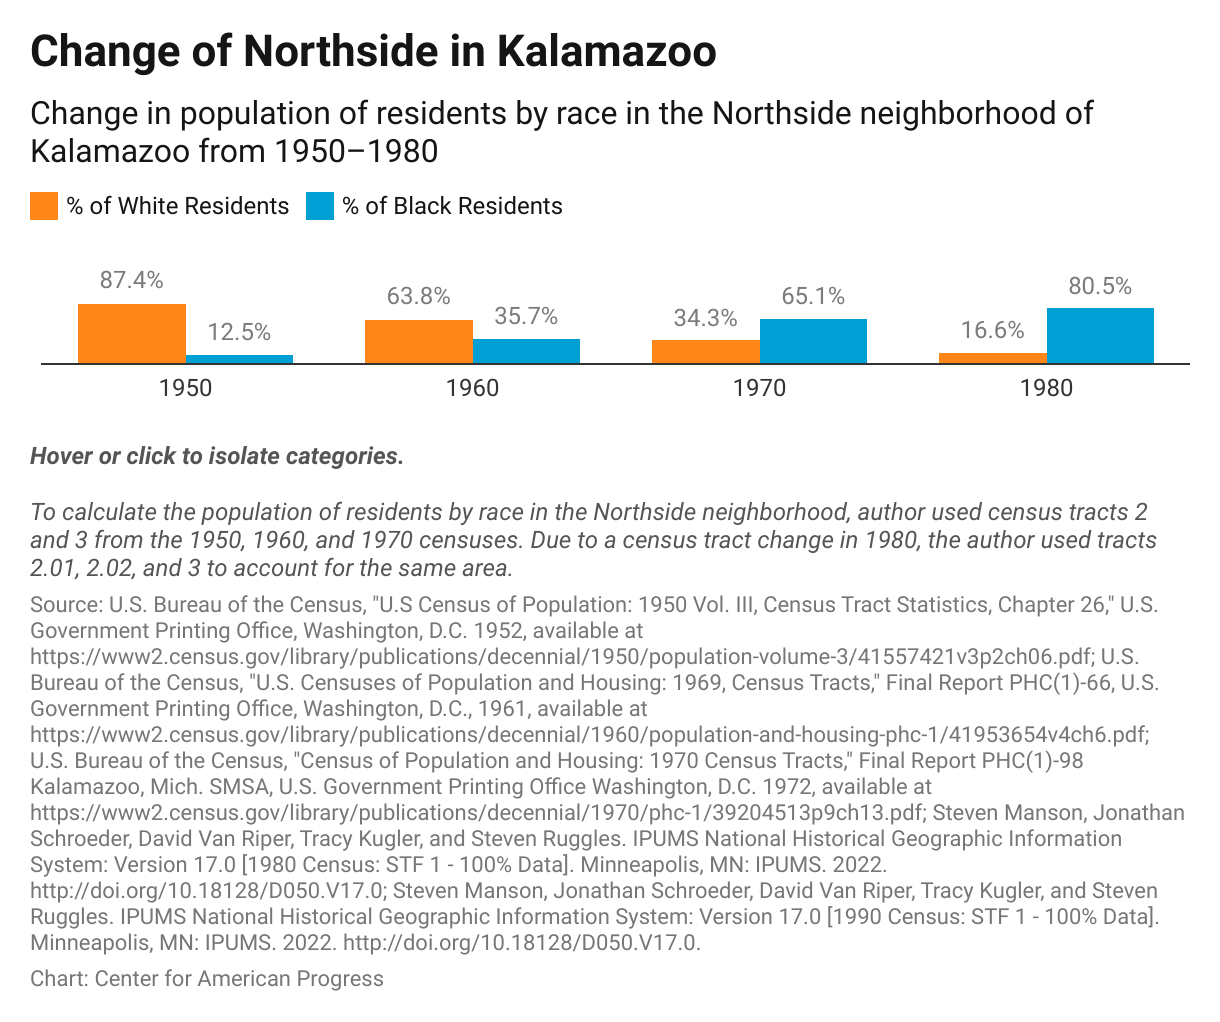 Map of the Northside neighborhood of Kalamazoo, Michigan showing the change in population of residents by race from 1950 to 1980.